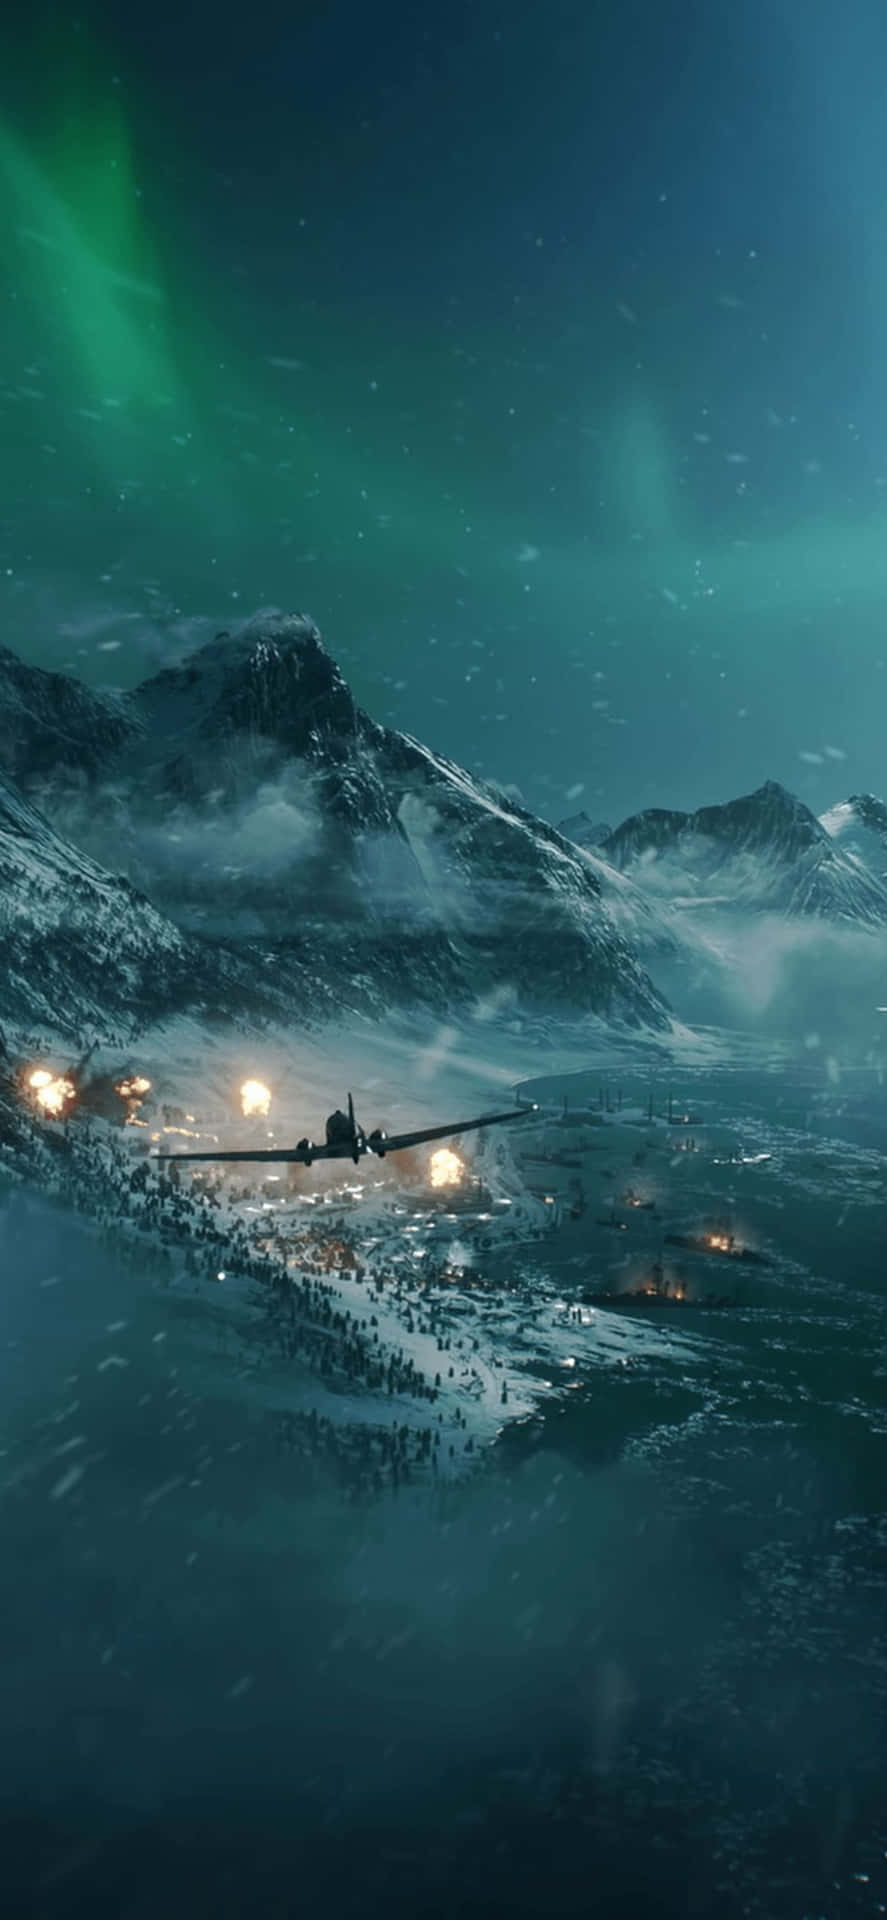 Step Into the Battlefield and Experience Incredible Action - HD Battlefield V